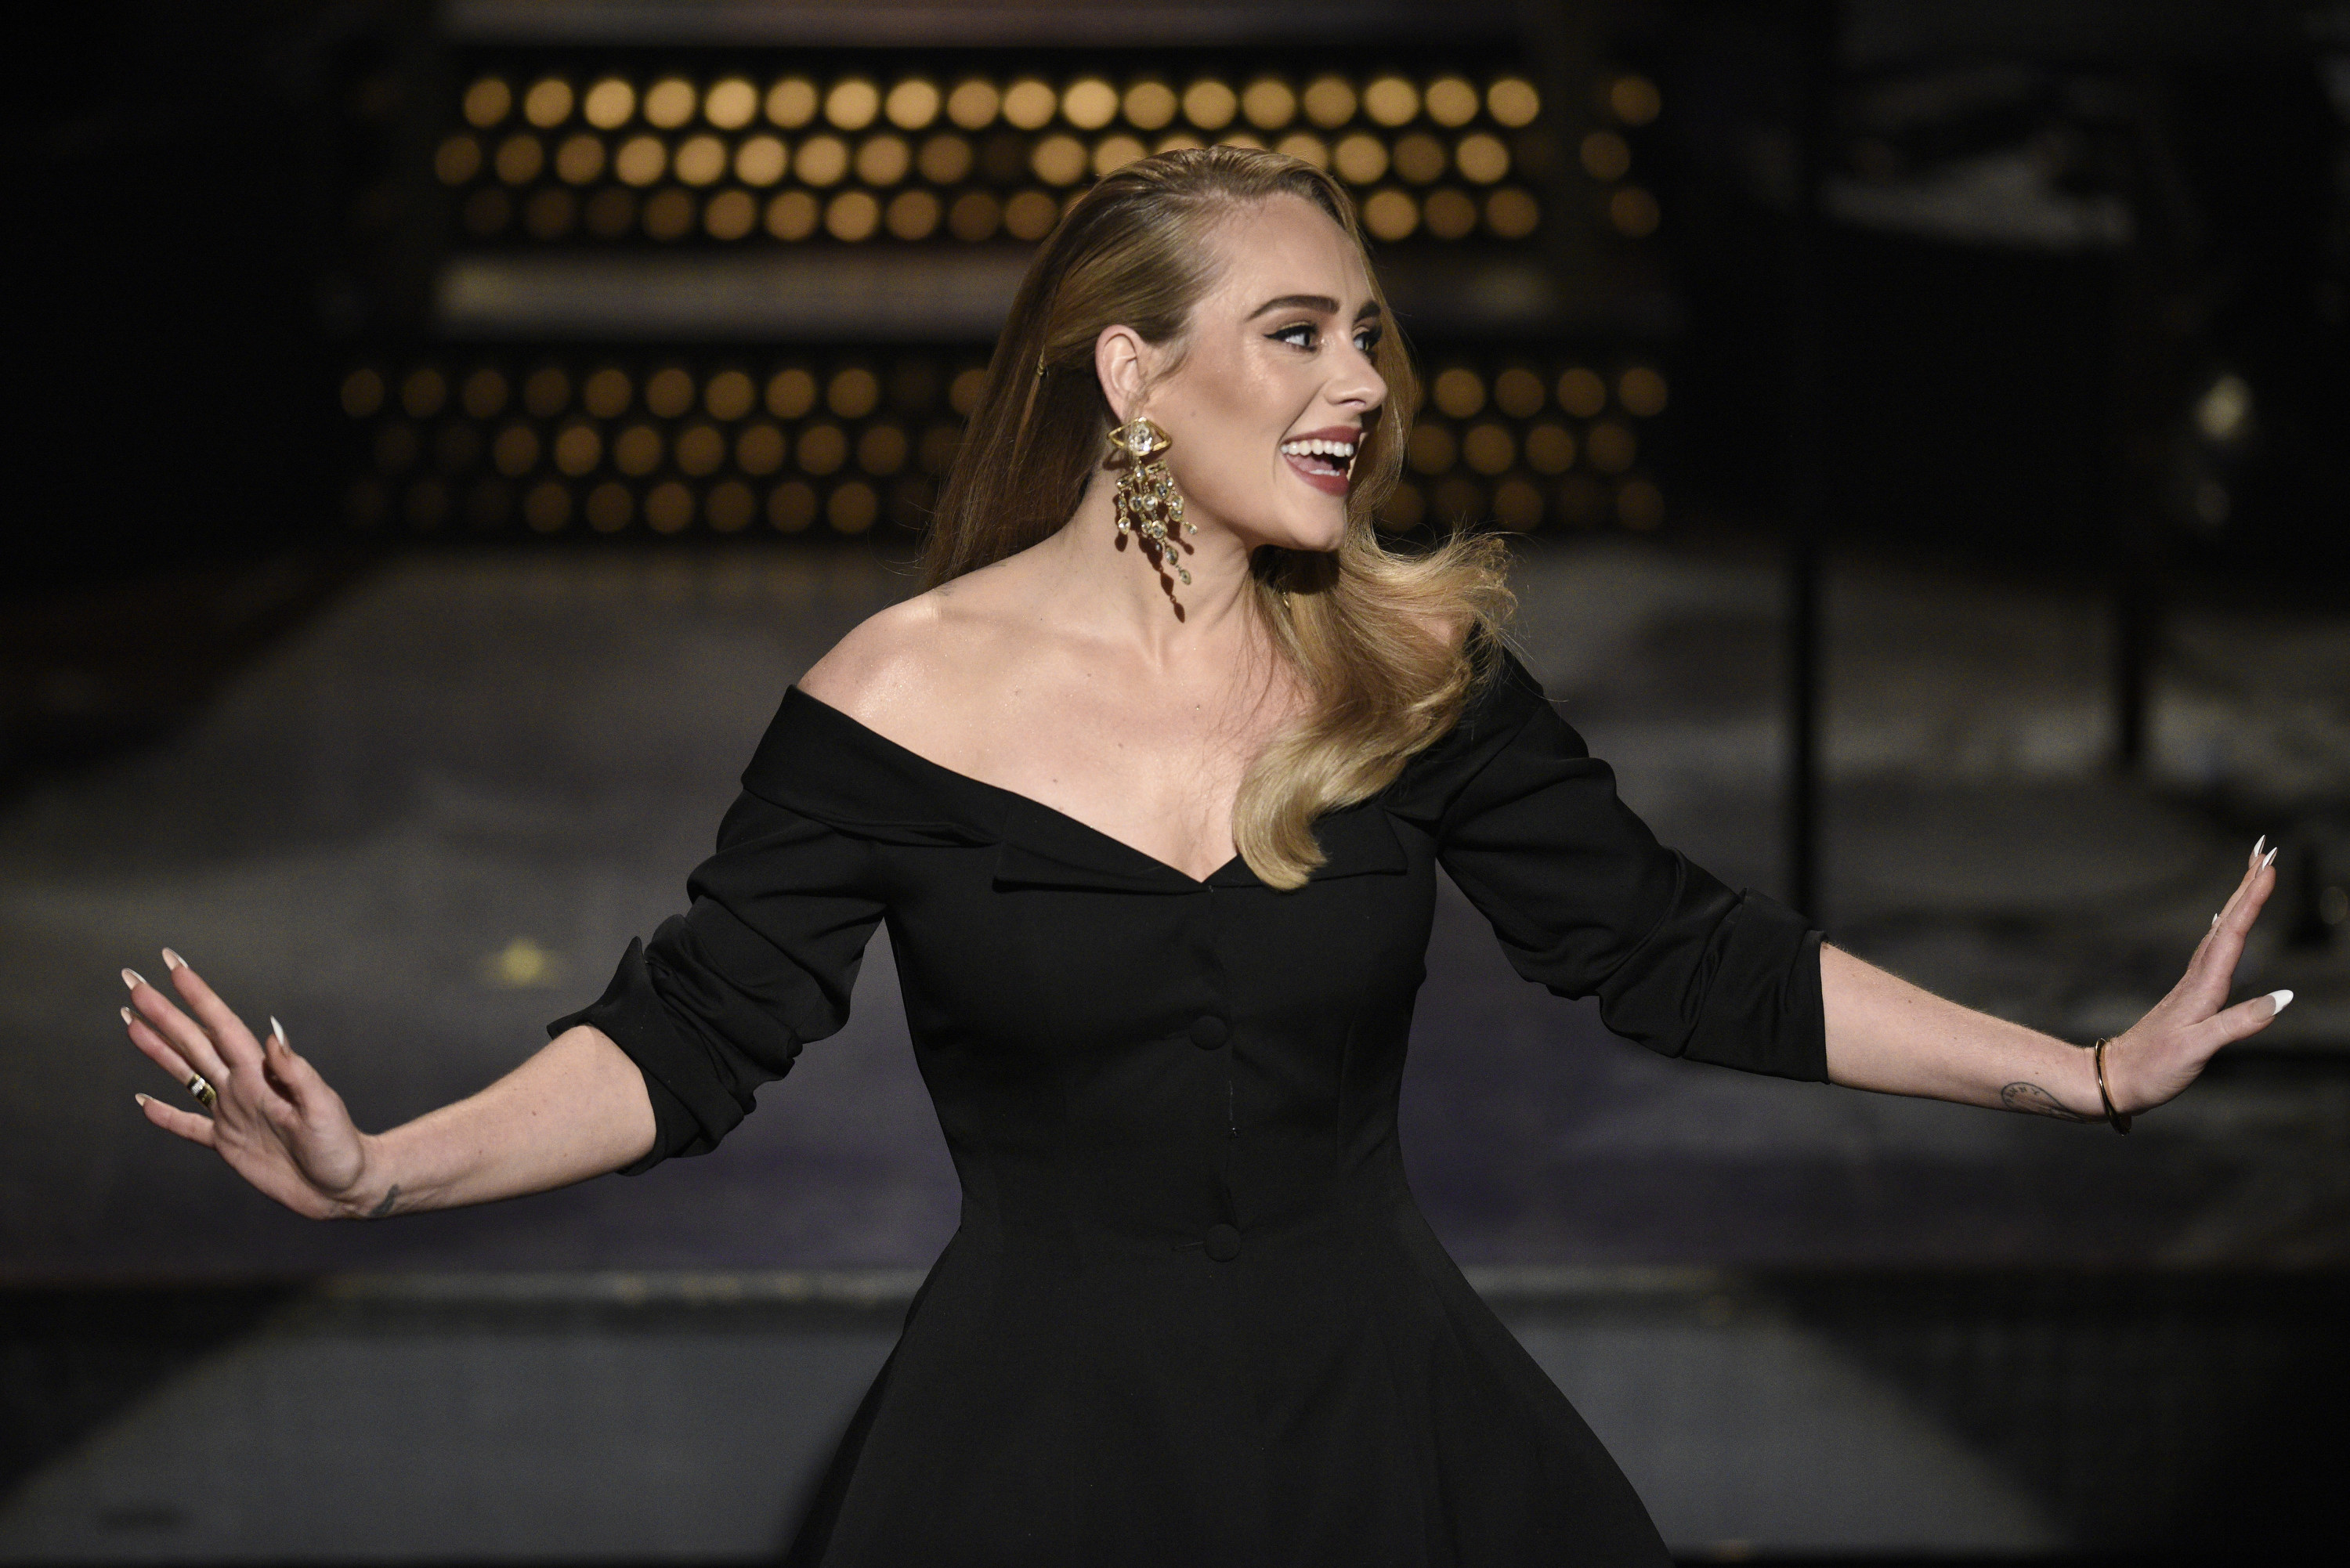 Adele extends her arms